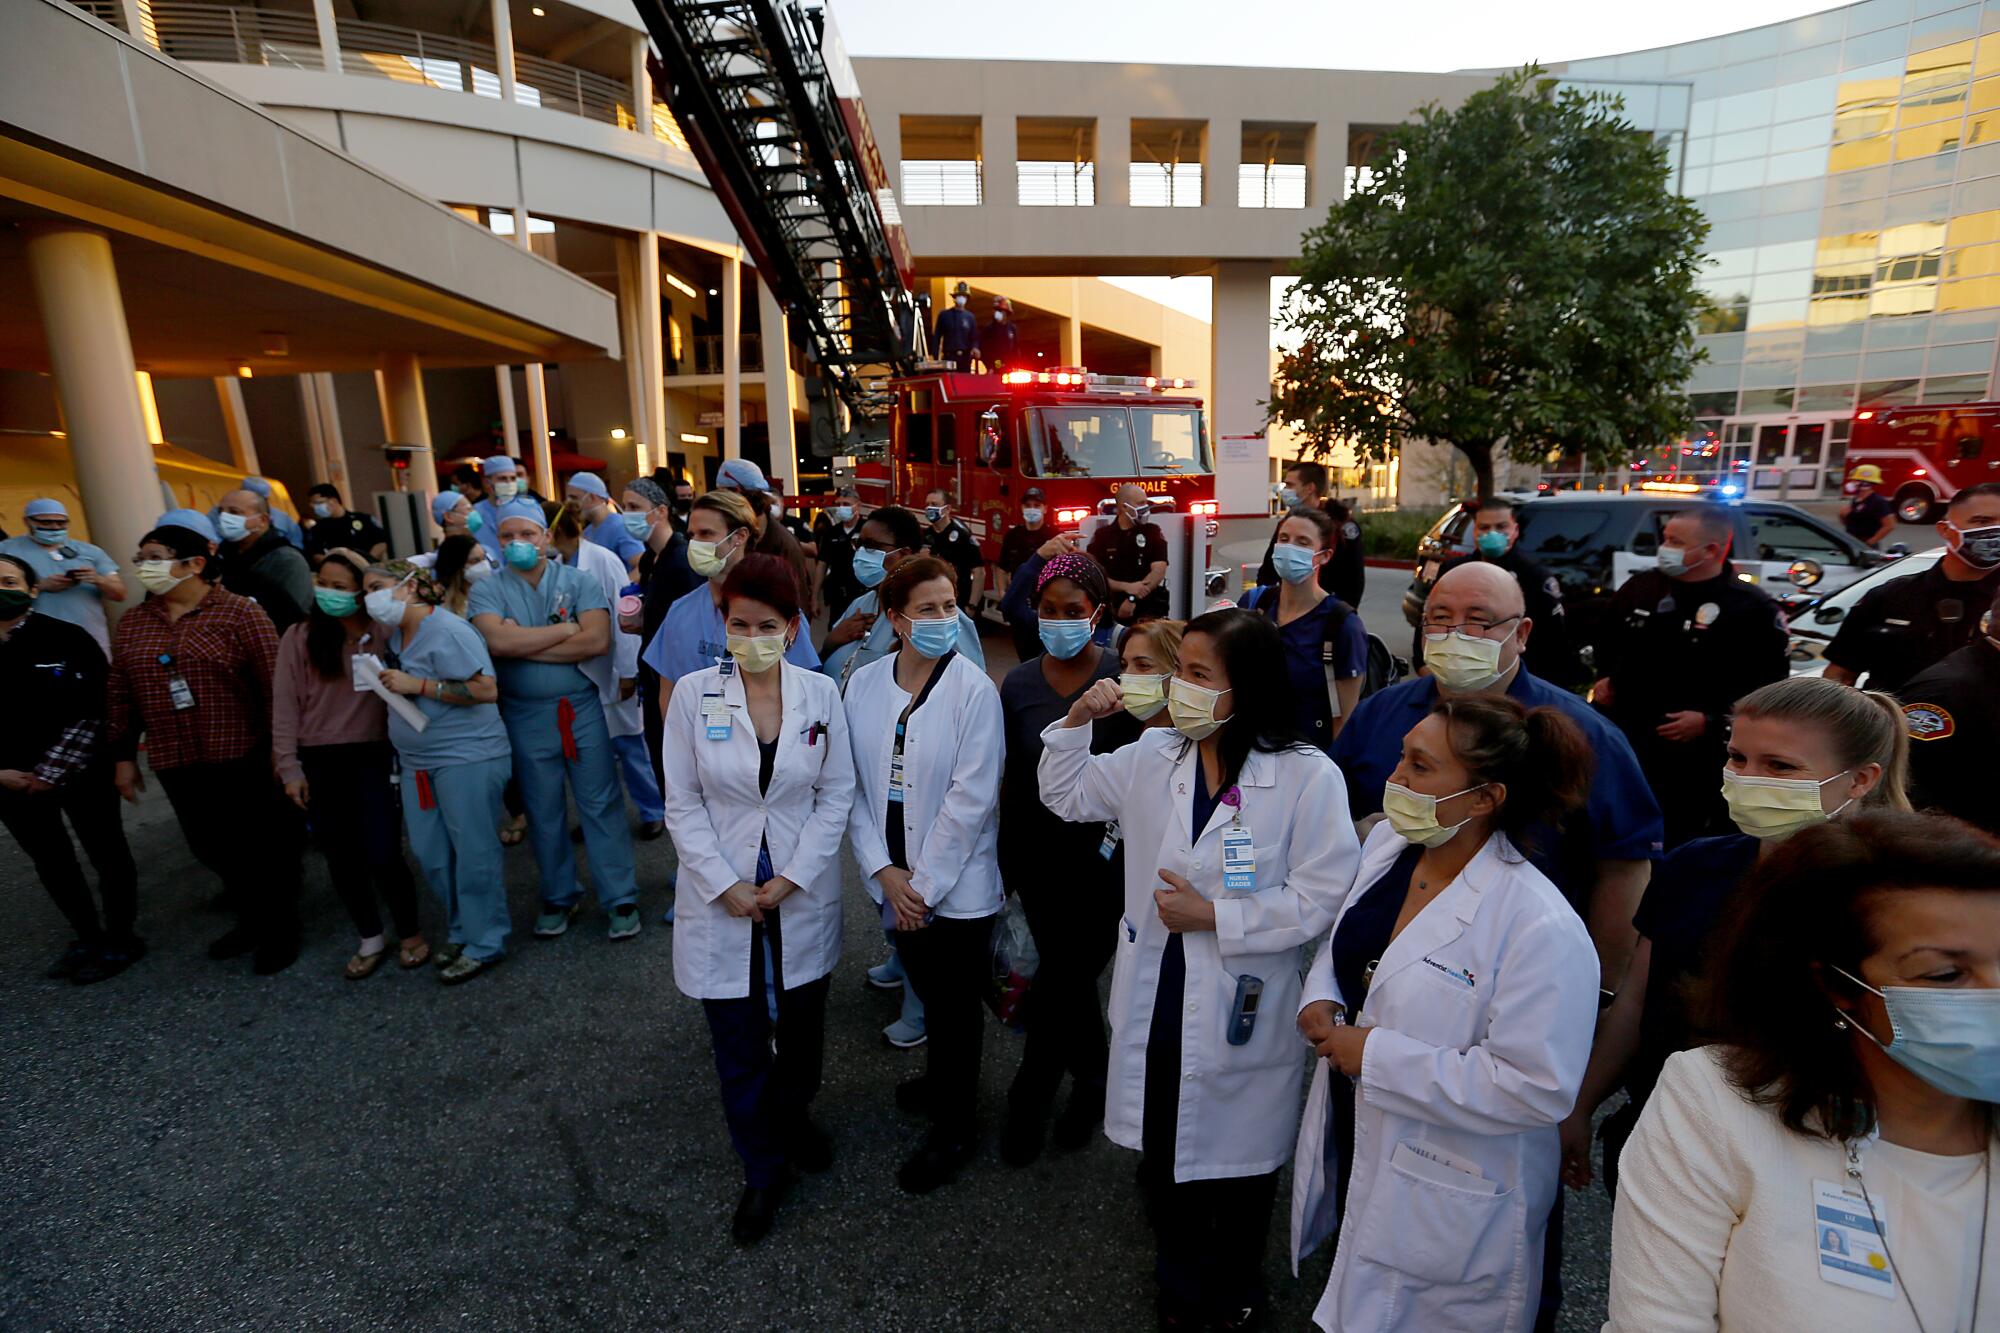 Healthcare workers, police officers and firefighters gather outside the Glendale hospital.